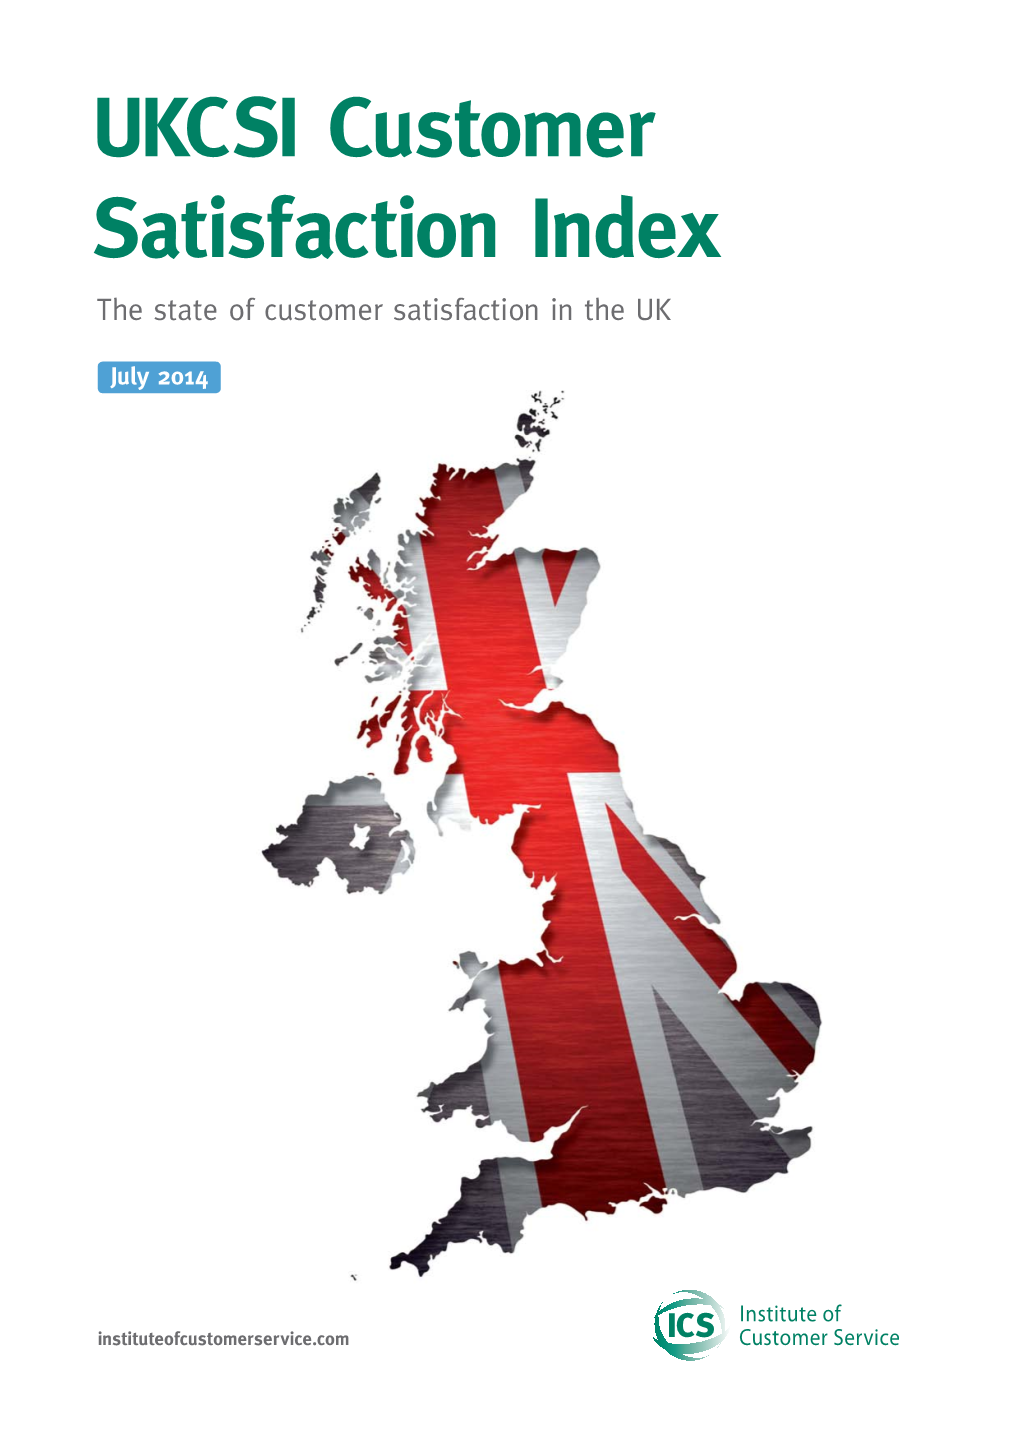 UKCSI Customer Satisfaction Index the State of Customer Satisfaction in the UK